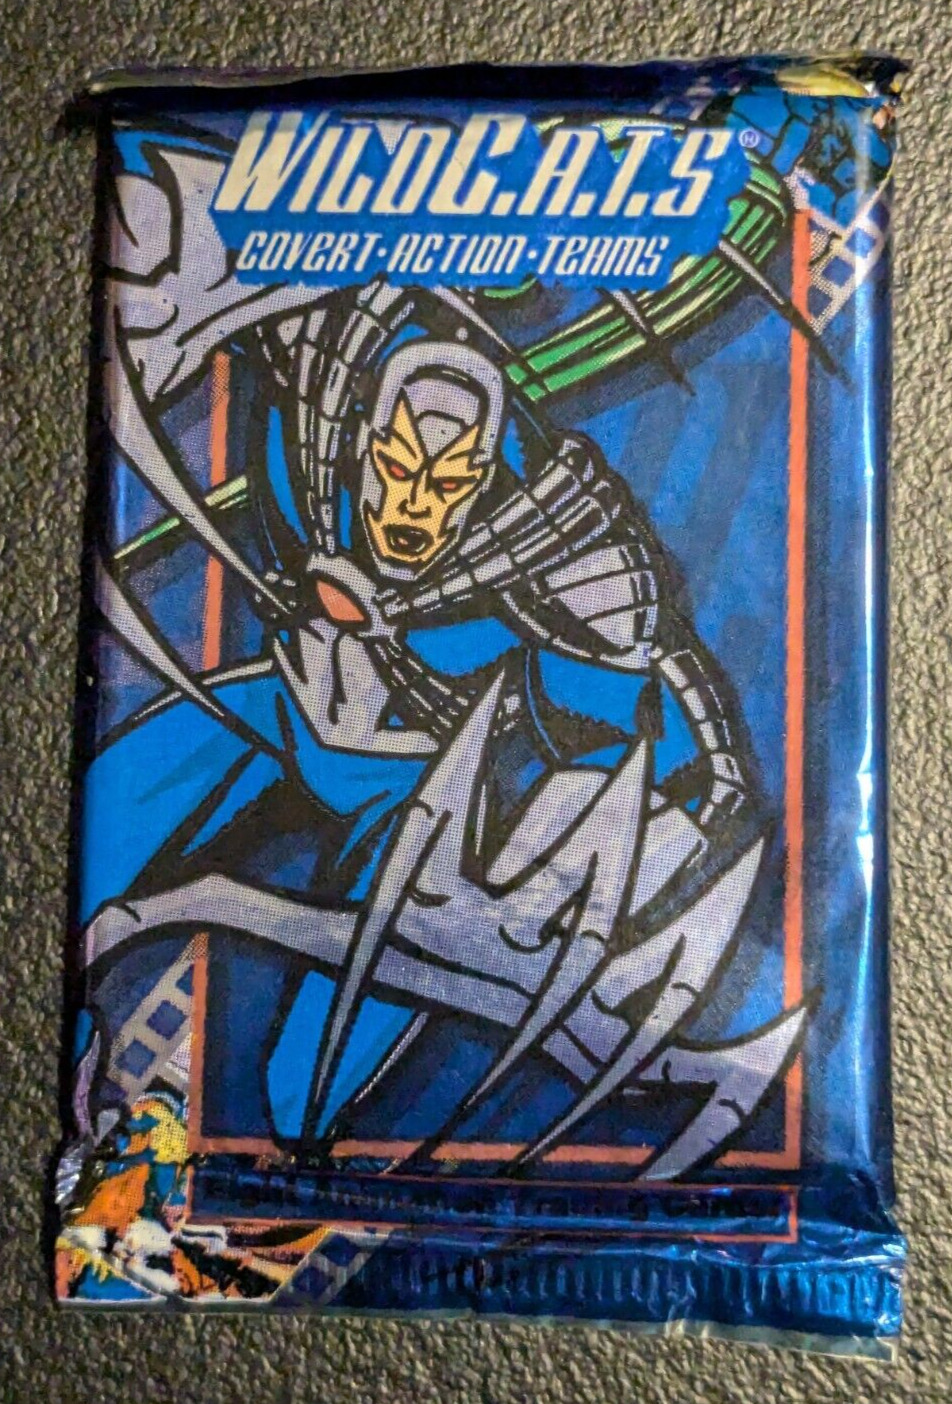 1995 WILDC.A.T.S. WildCATS Covert Action Teams trading cards sealed pack